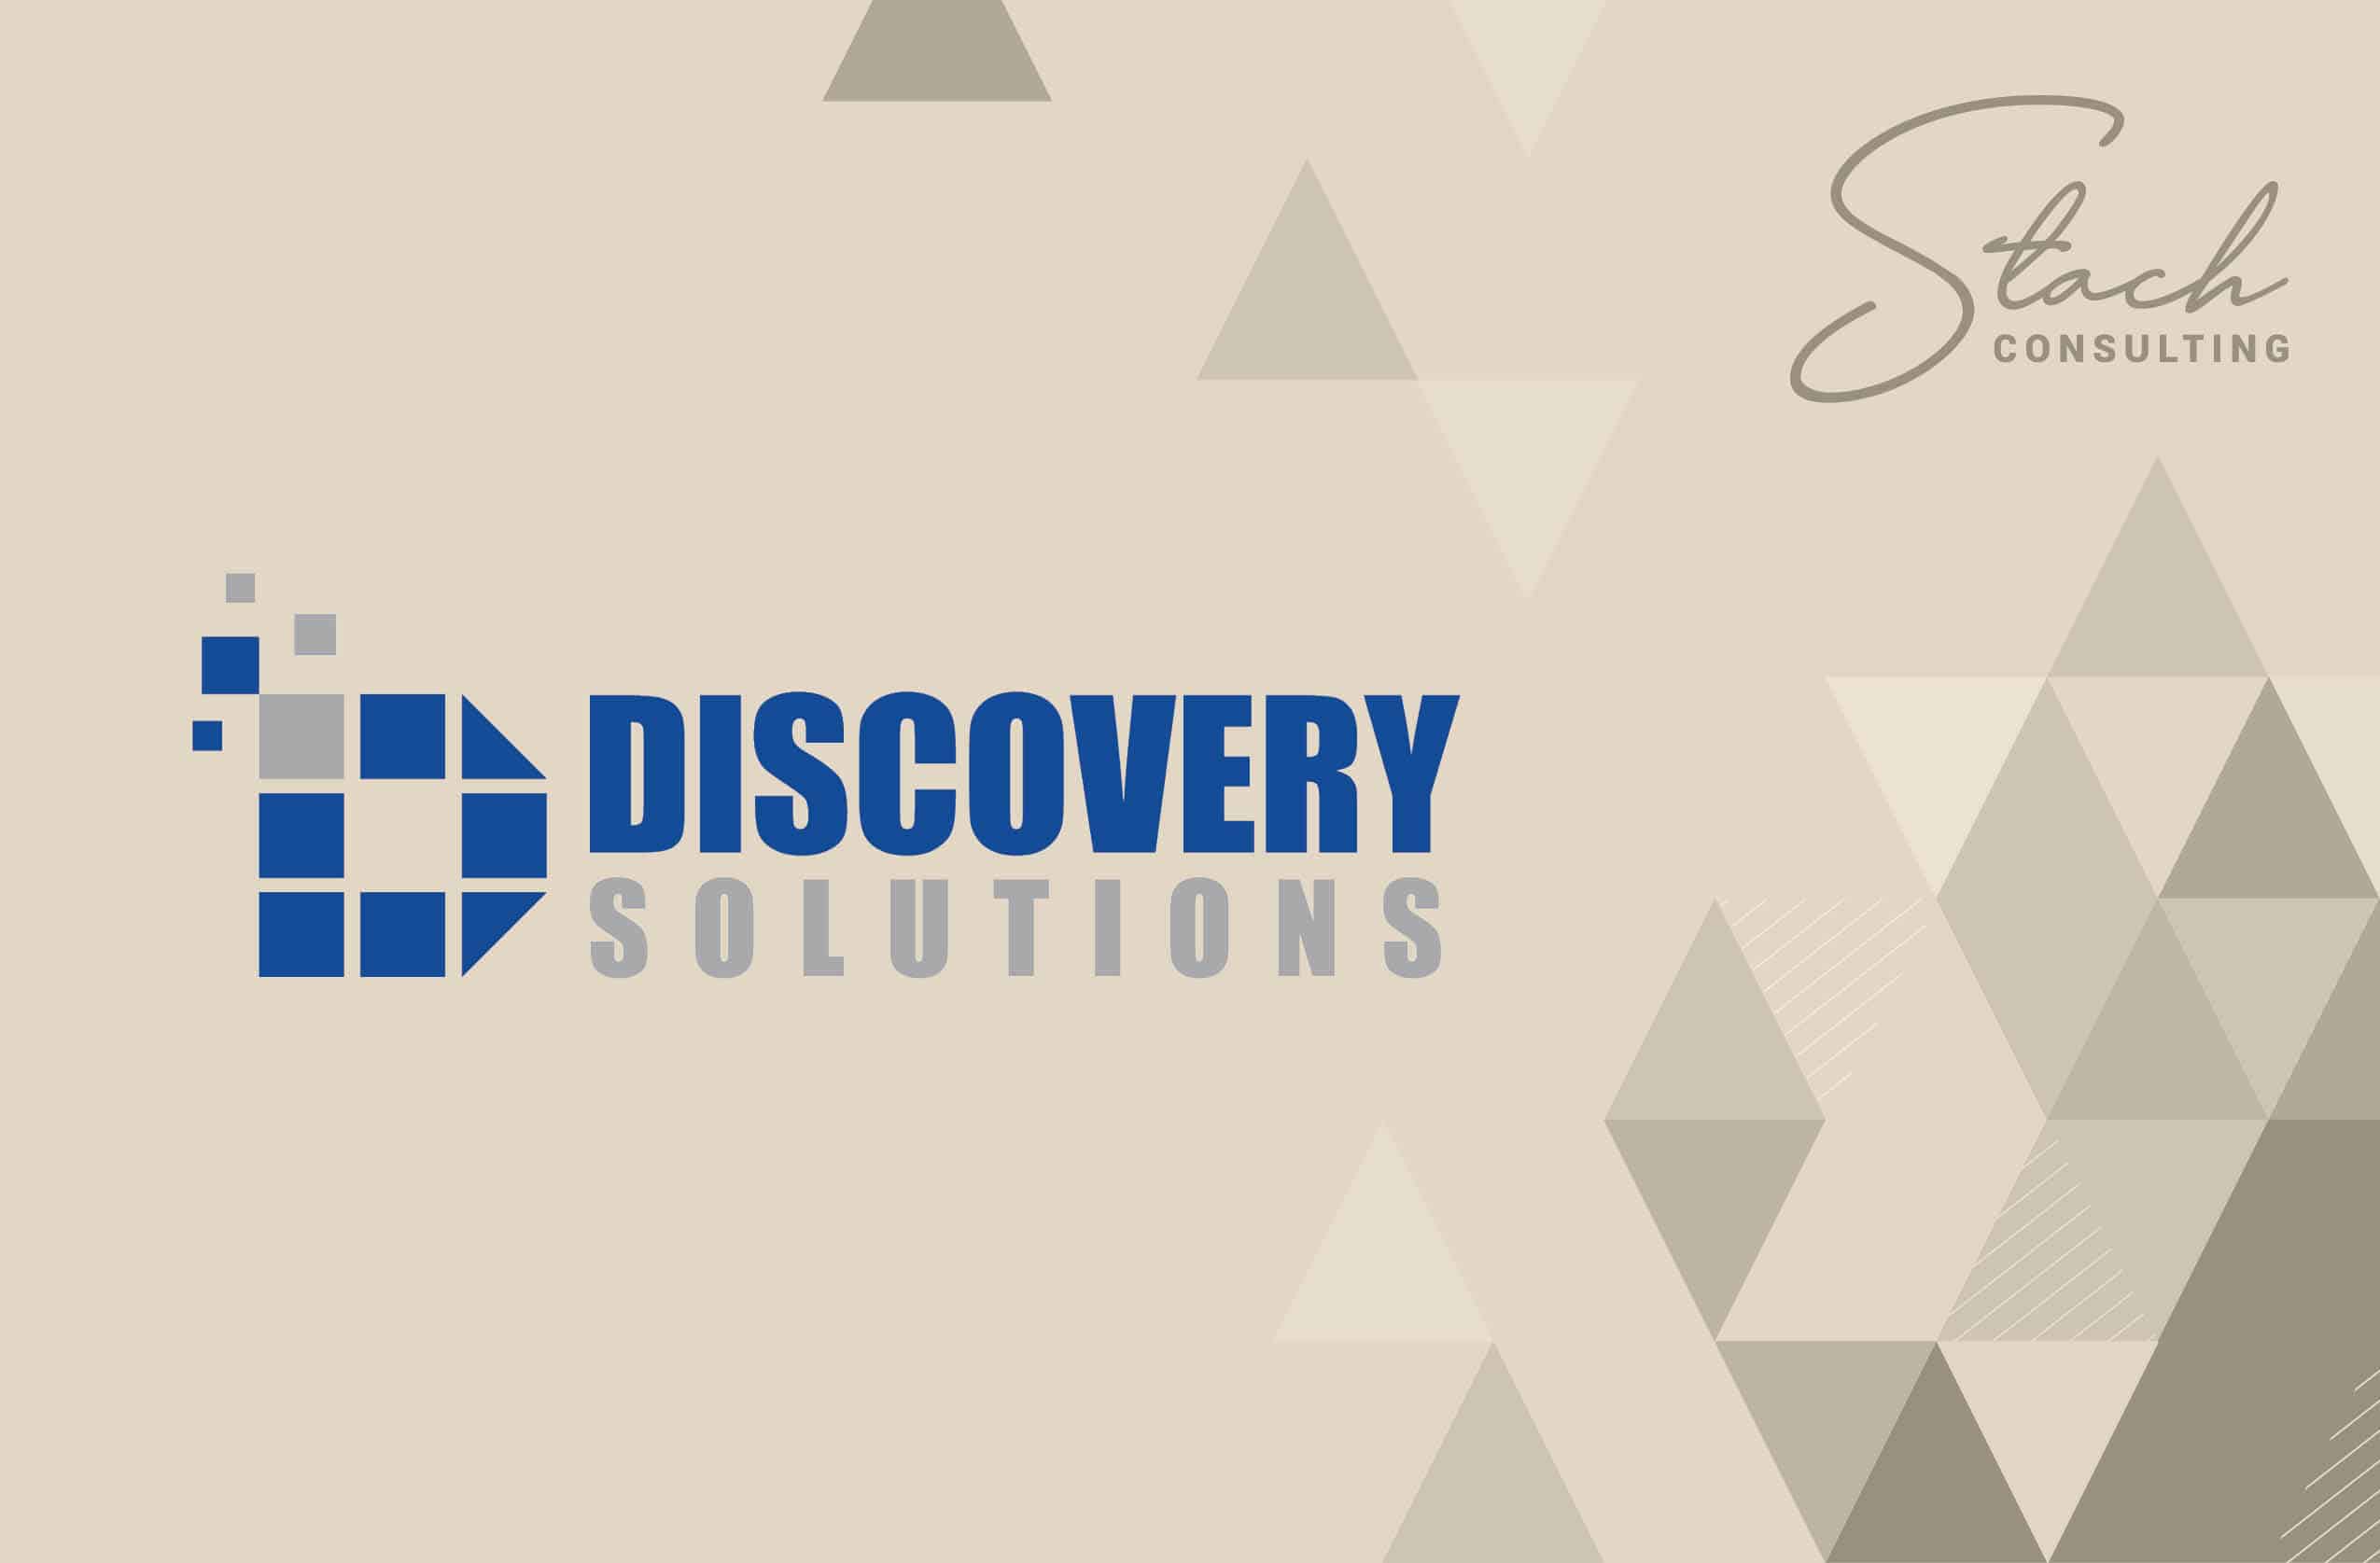 Discovery Solutions Logo with Stach Consulting Logo